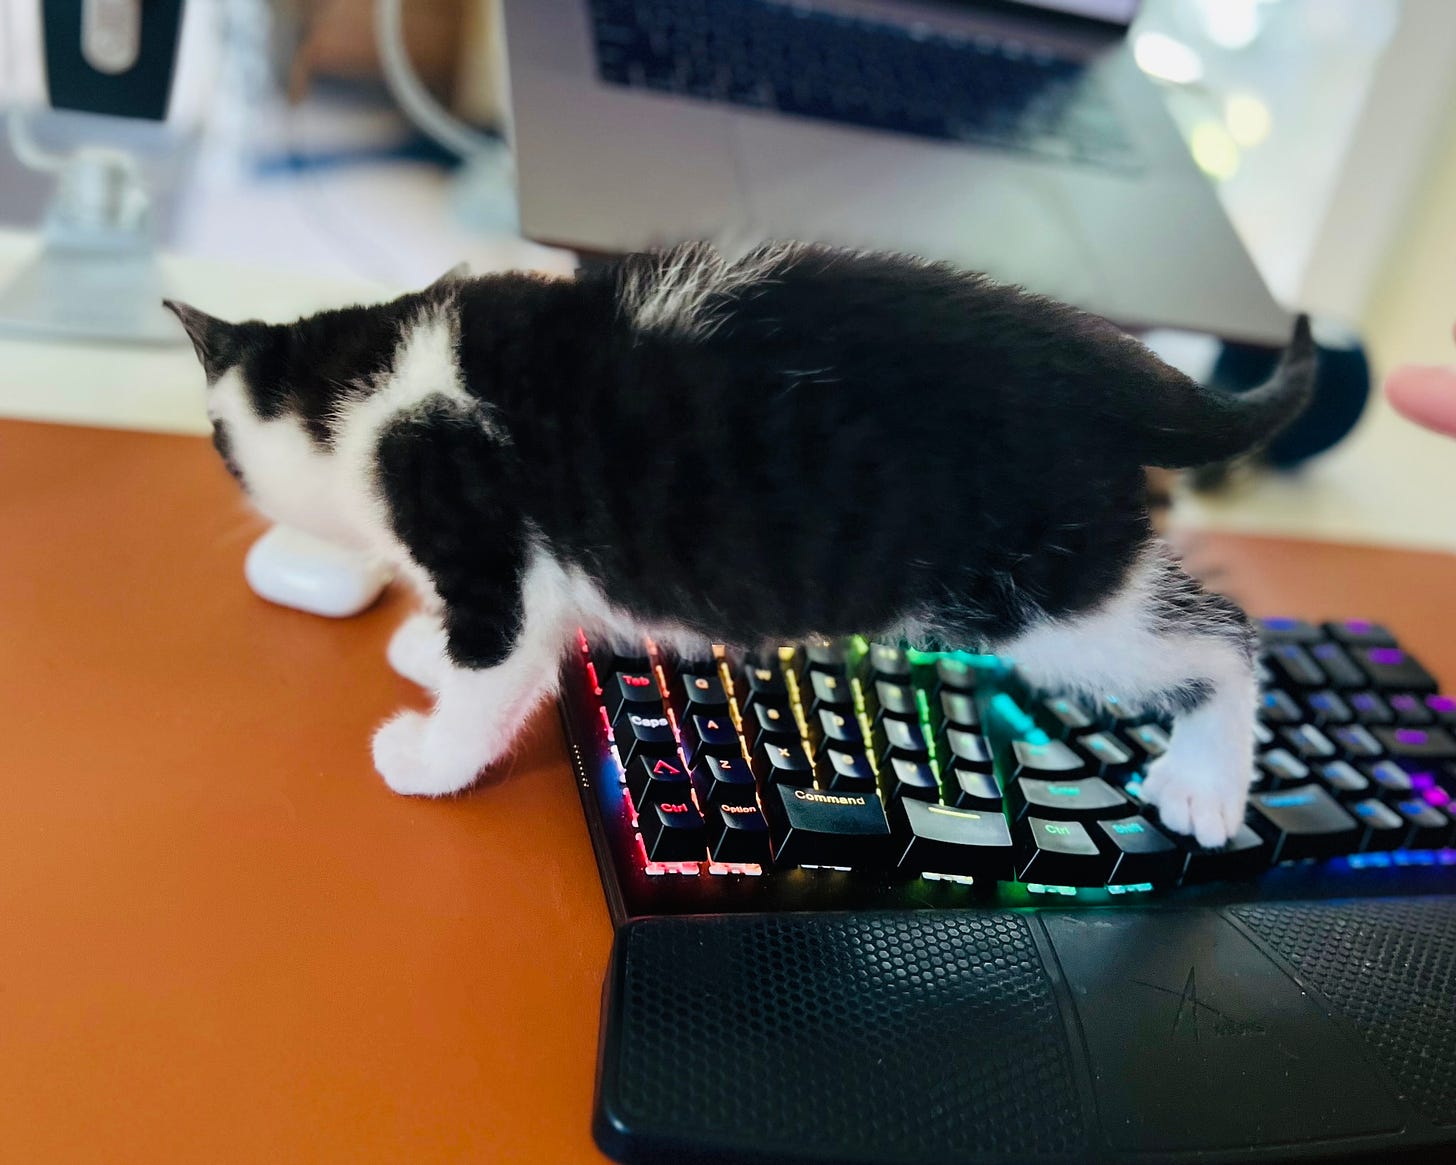 A black and white kitten walking on a keyboard.